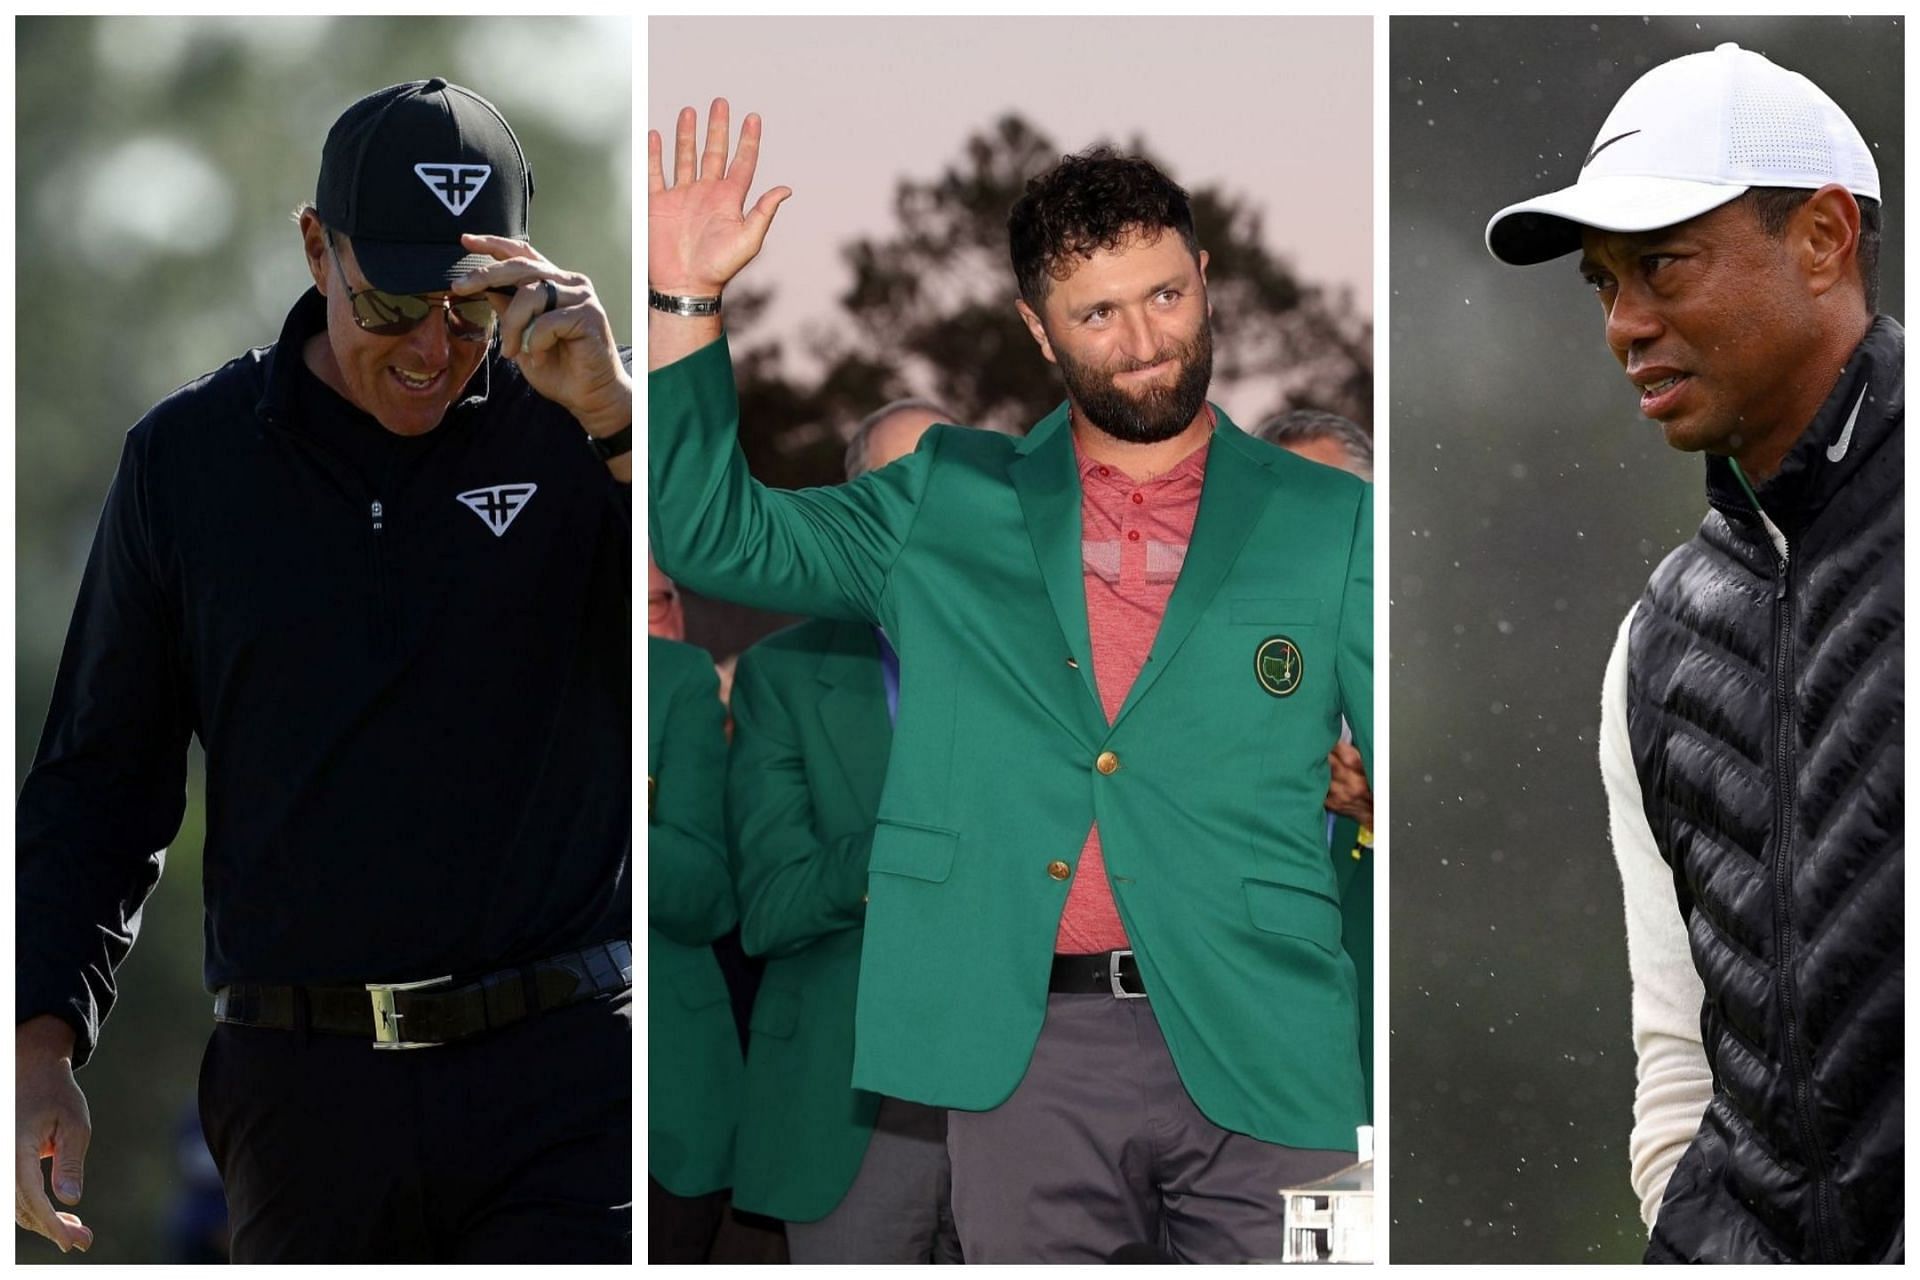 Different emotions on display at the 2023 Masters (Images via Getty)